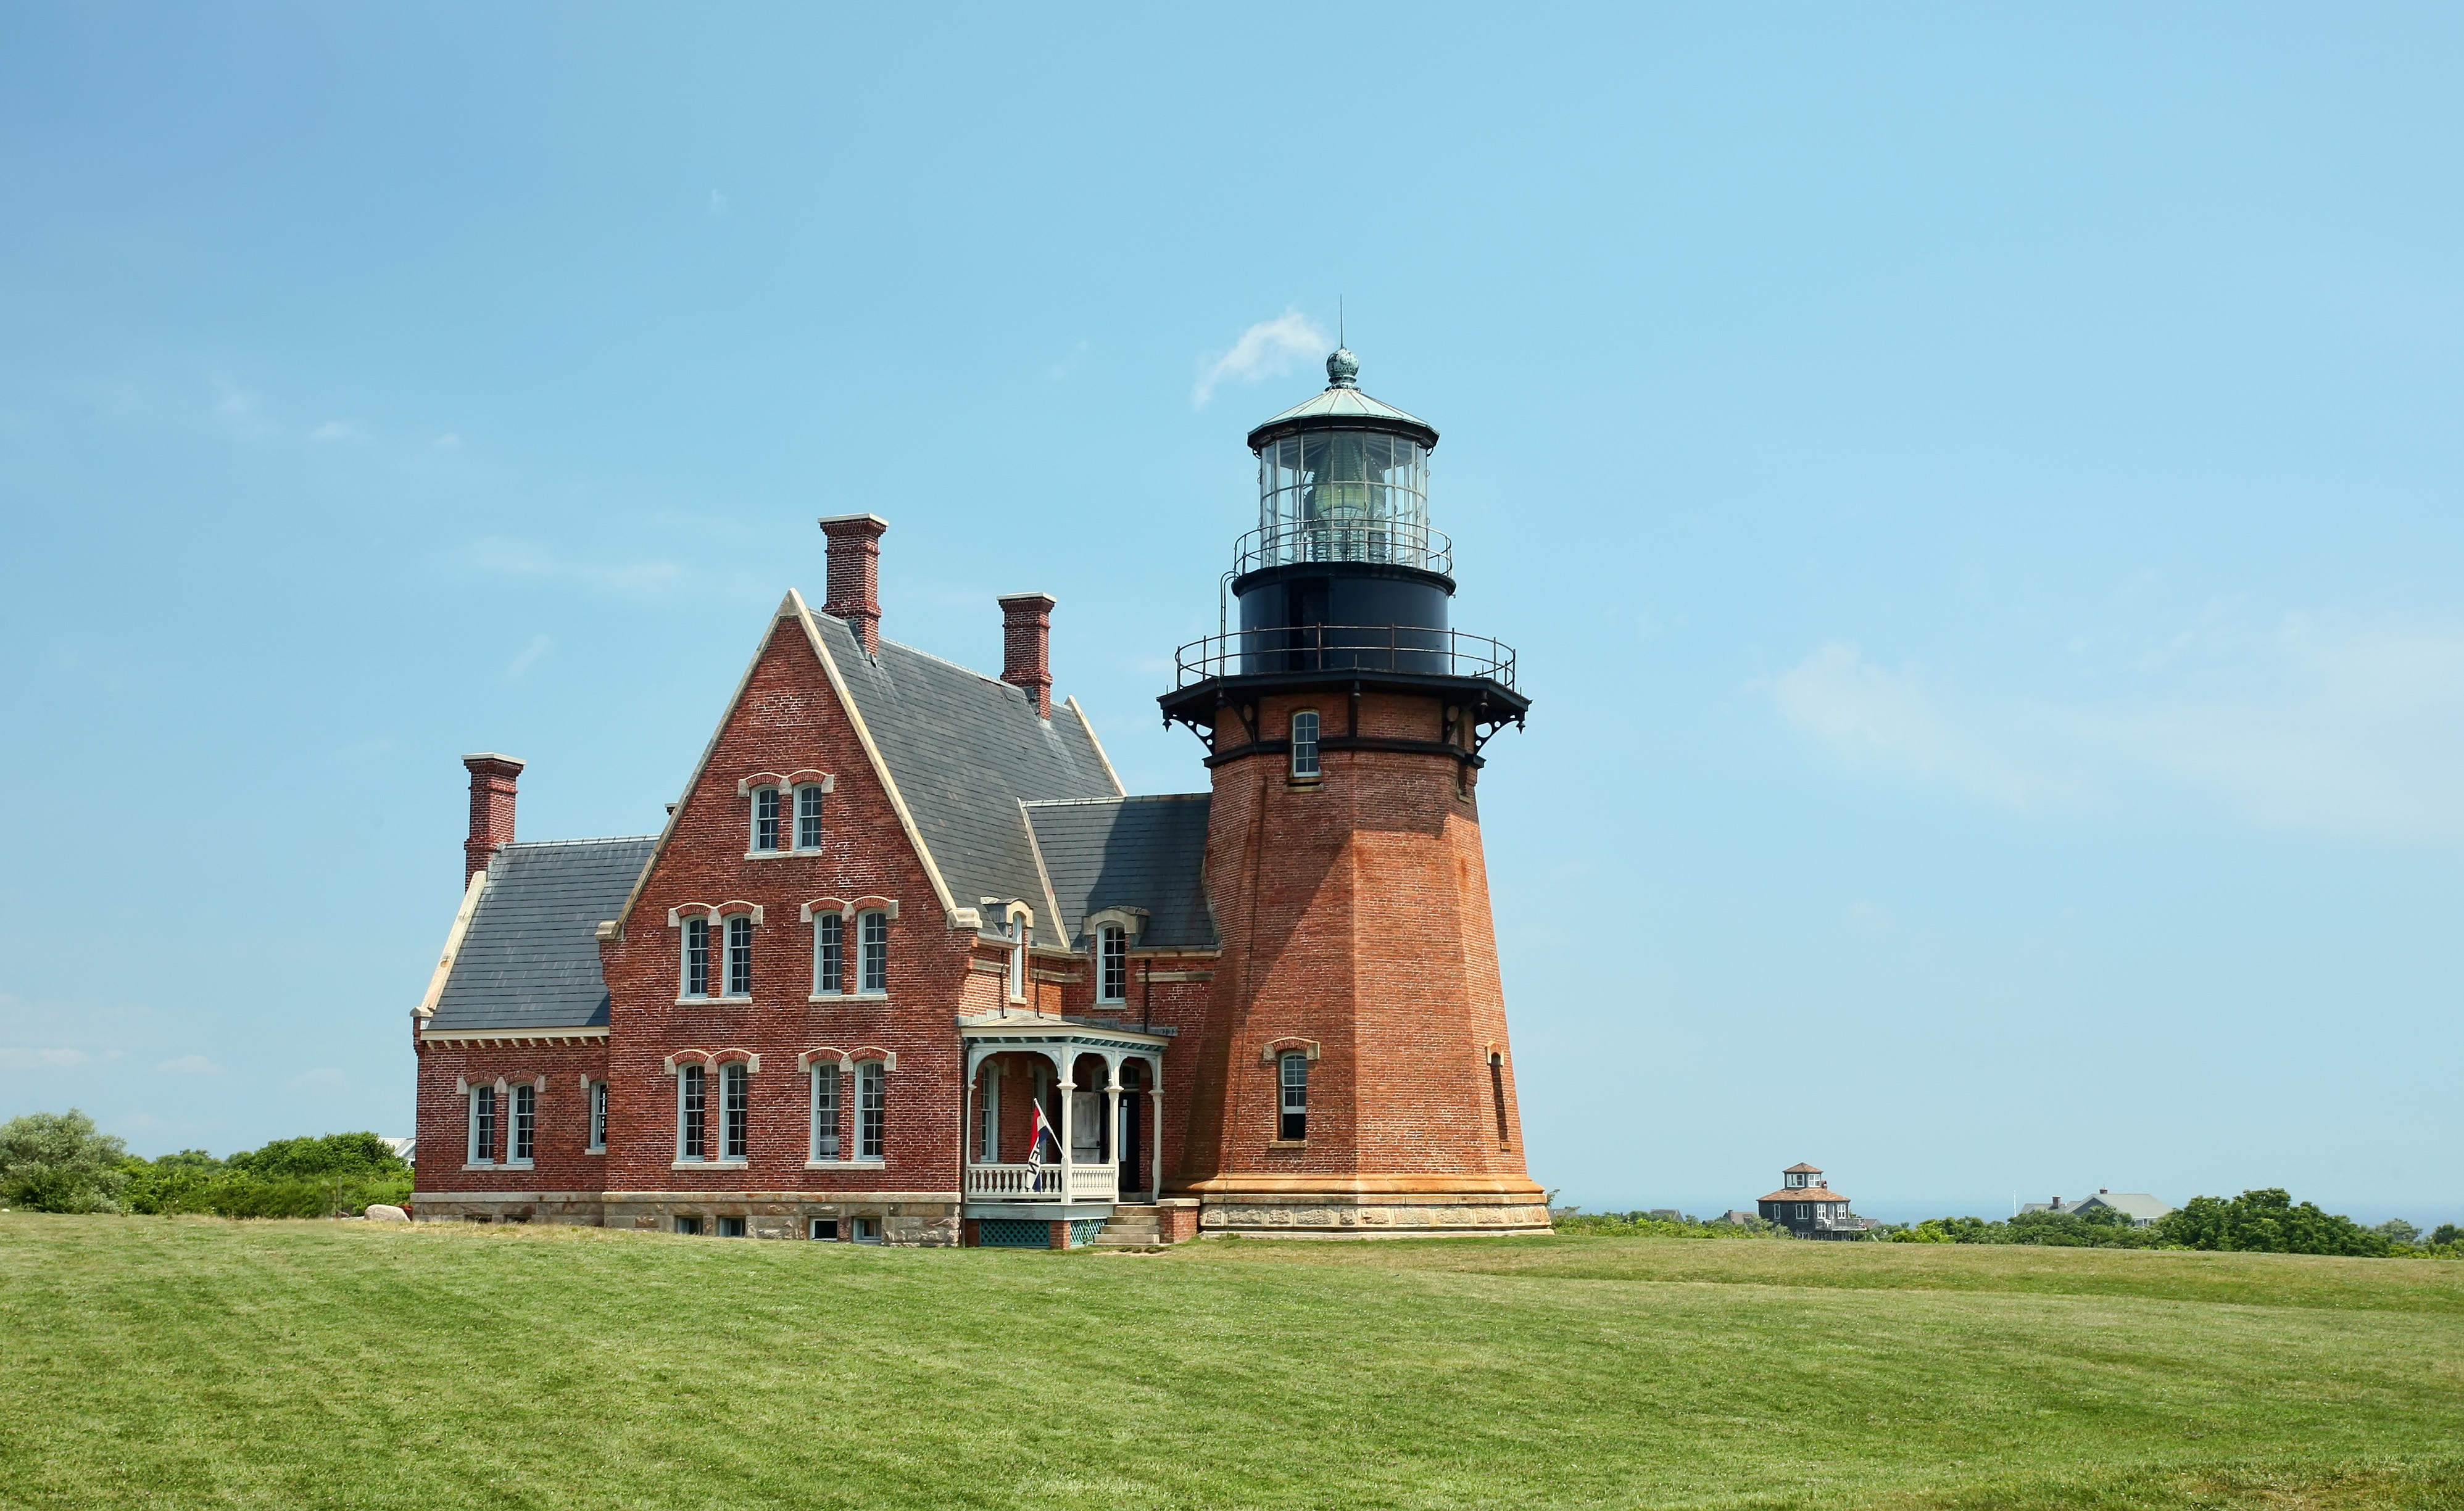 Consider These US Beach Towns for Summer Family Vacations - Southeast Lighthouse on Block Island, Rhode Island